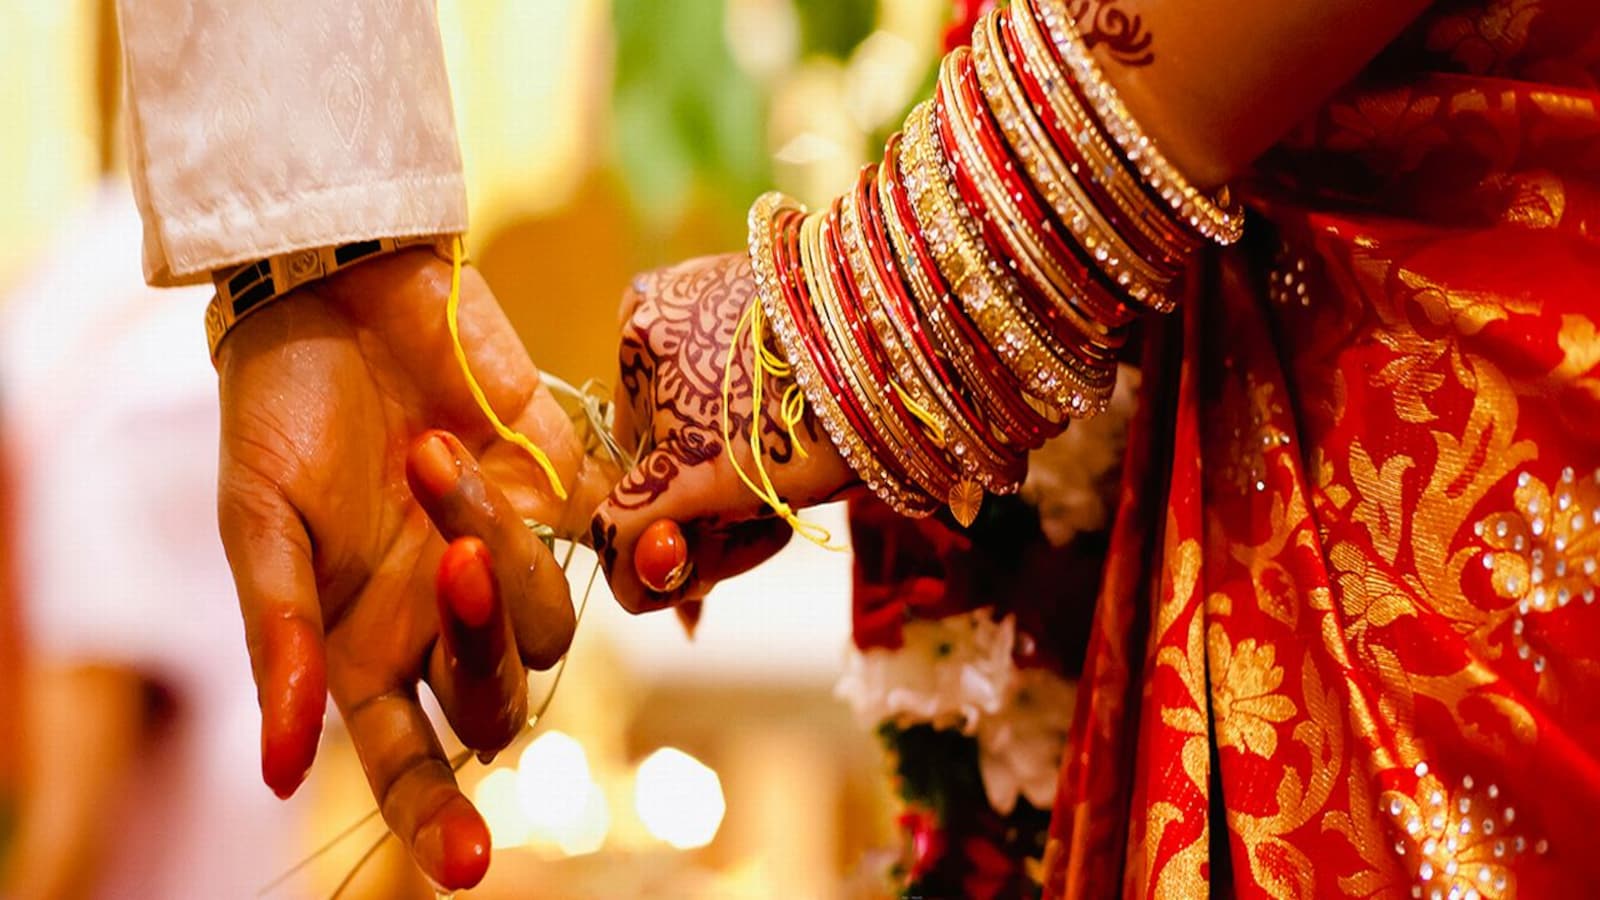 Planning to invest in Matrimony stocks? 10 things to know about India's 'shaadi' market